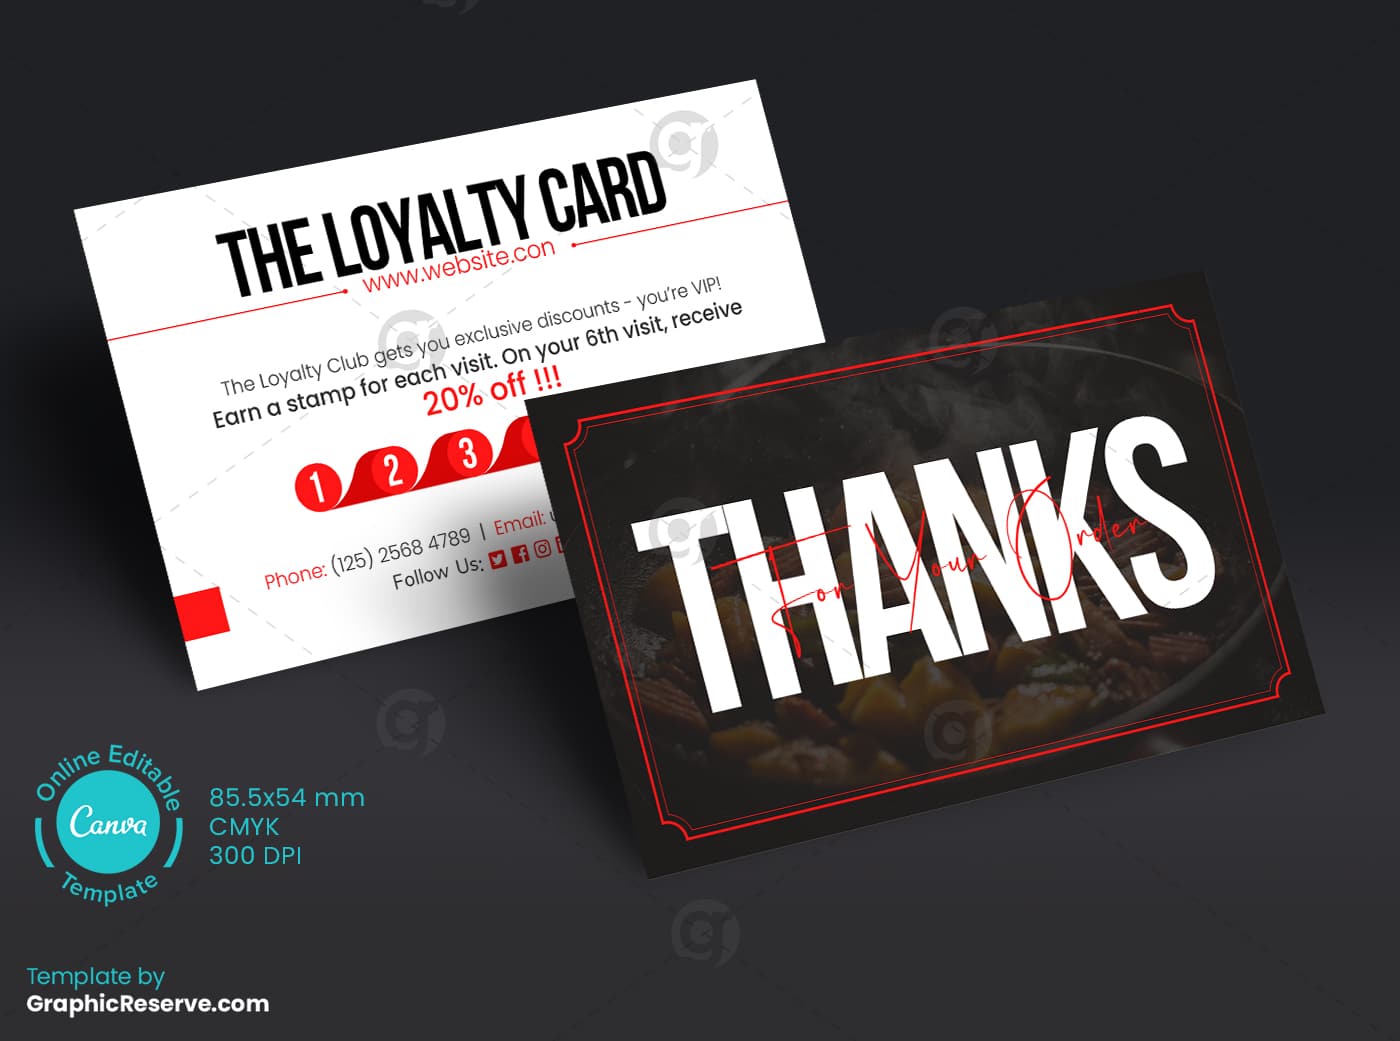 Thank you Loyalty Card 